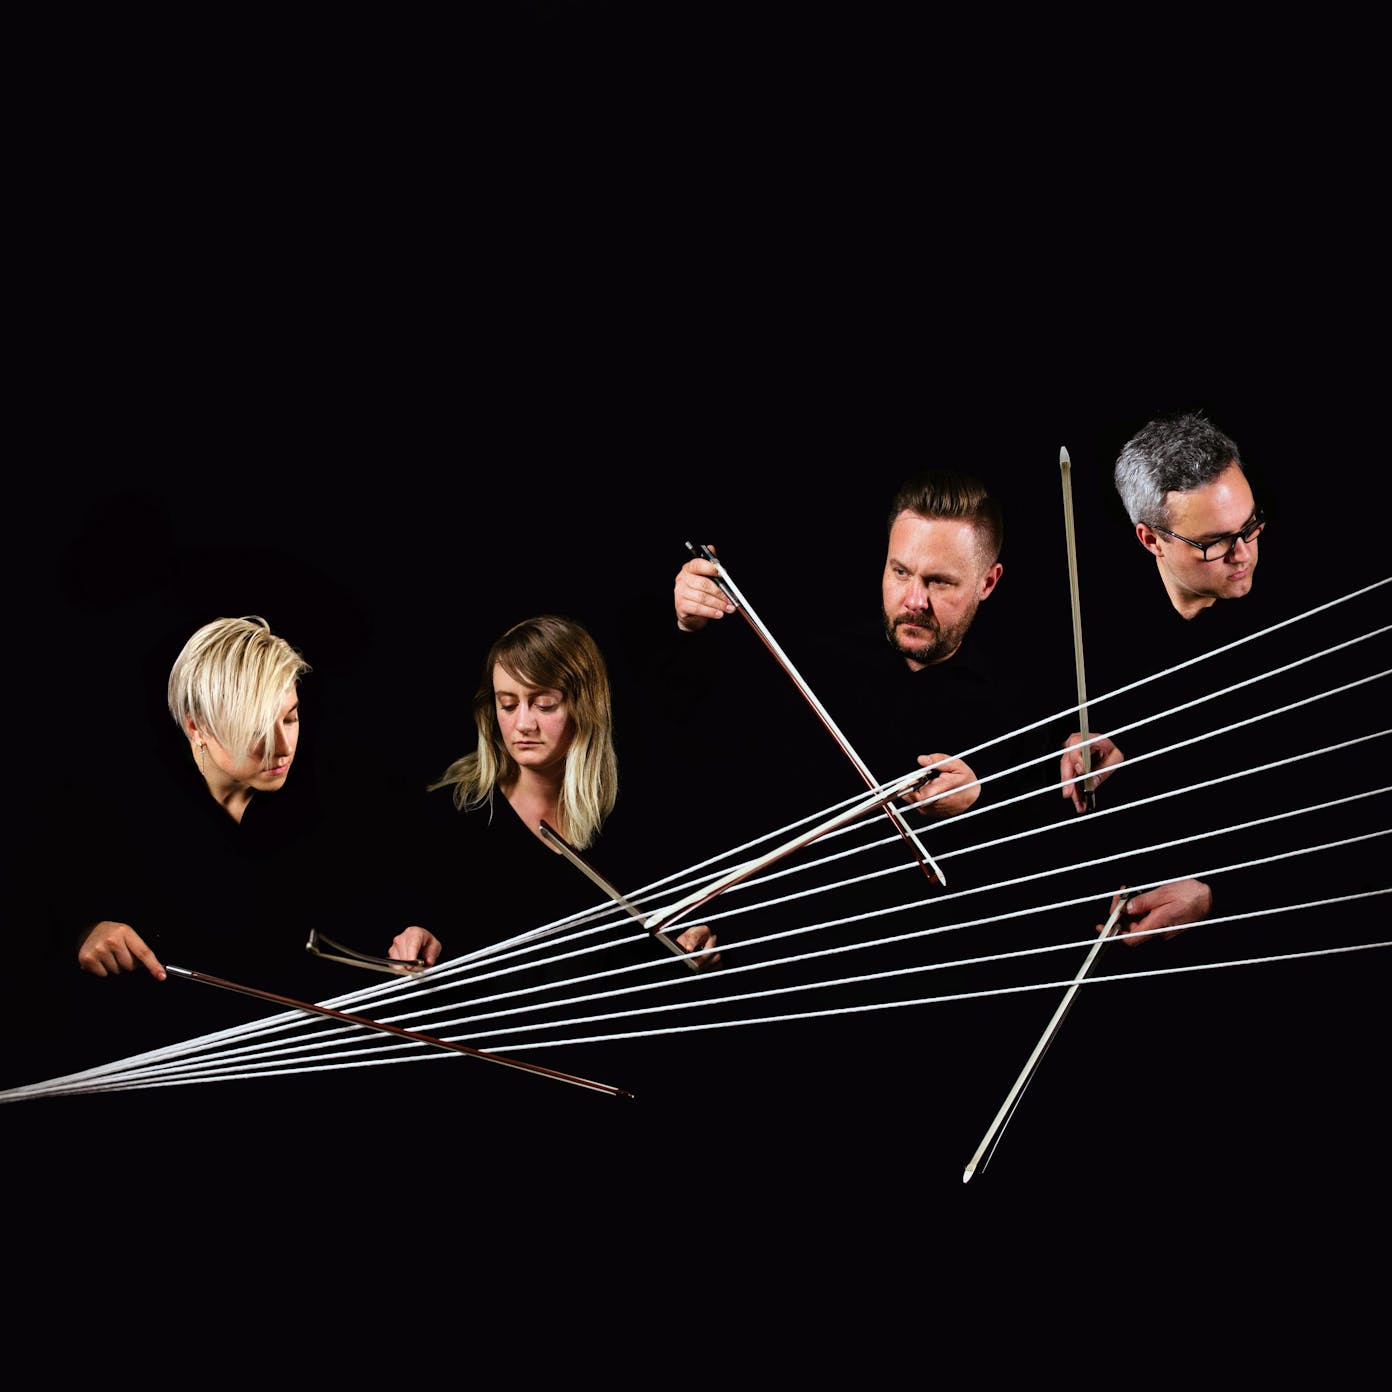 The heads and hands of four people appear out of darkness as they all play a large group of strings.